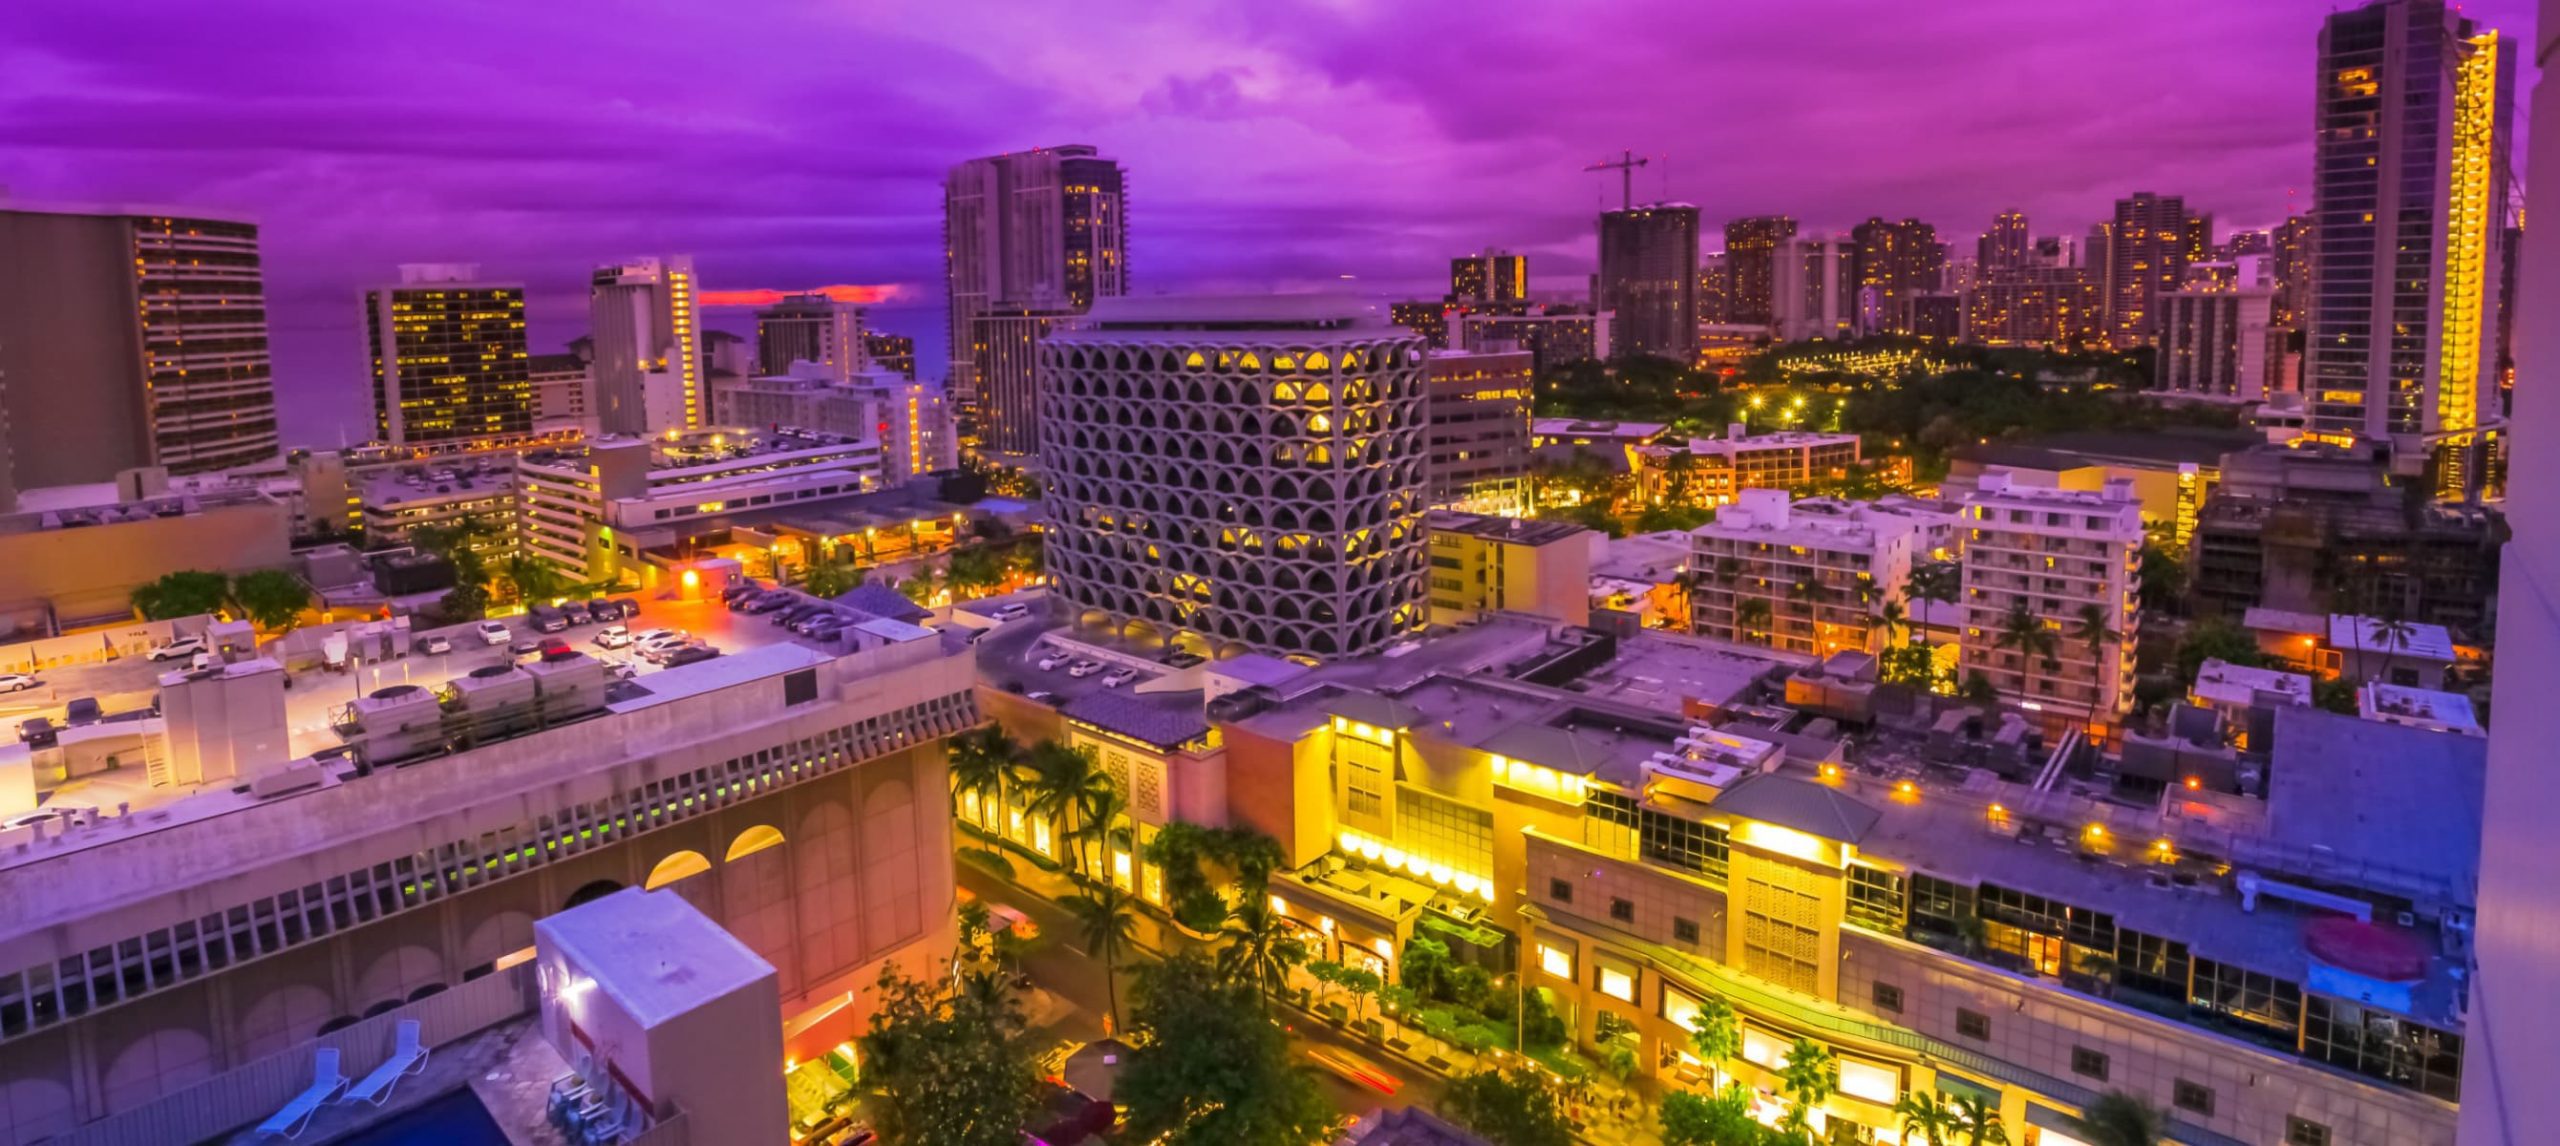 The 6 Best Places For Nightlife In Honolulu, HI